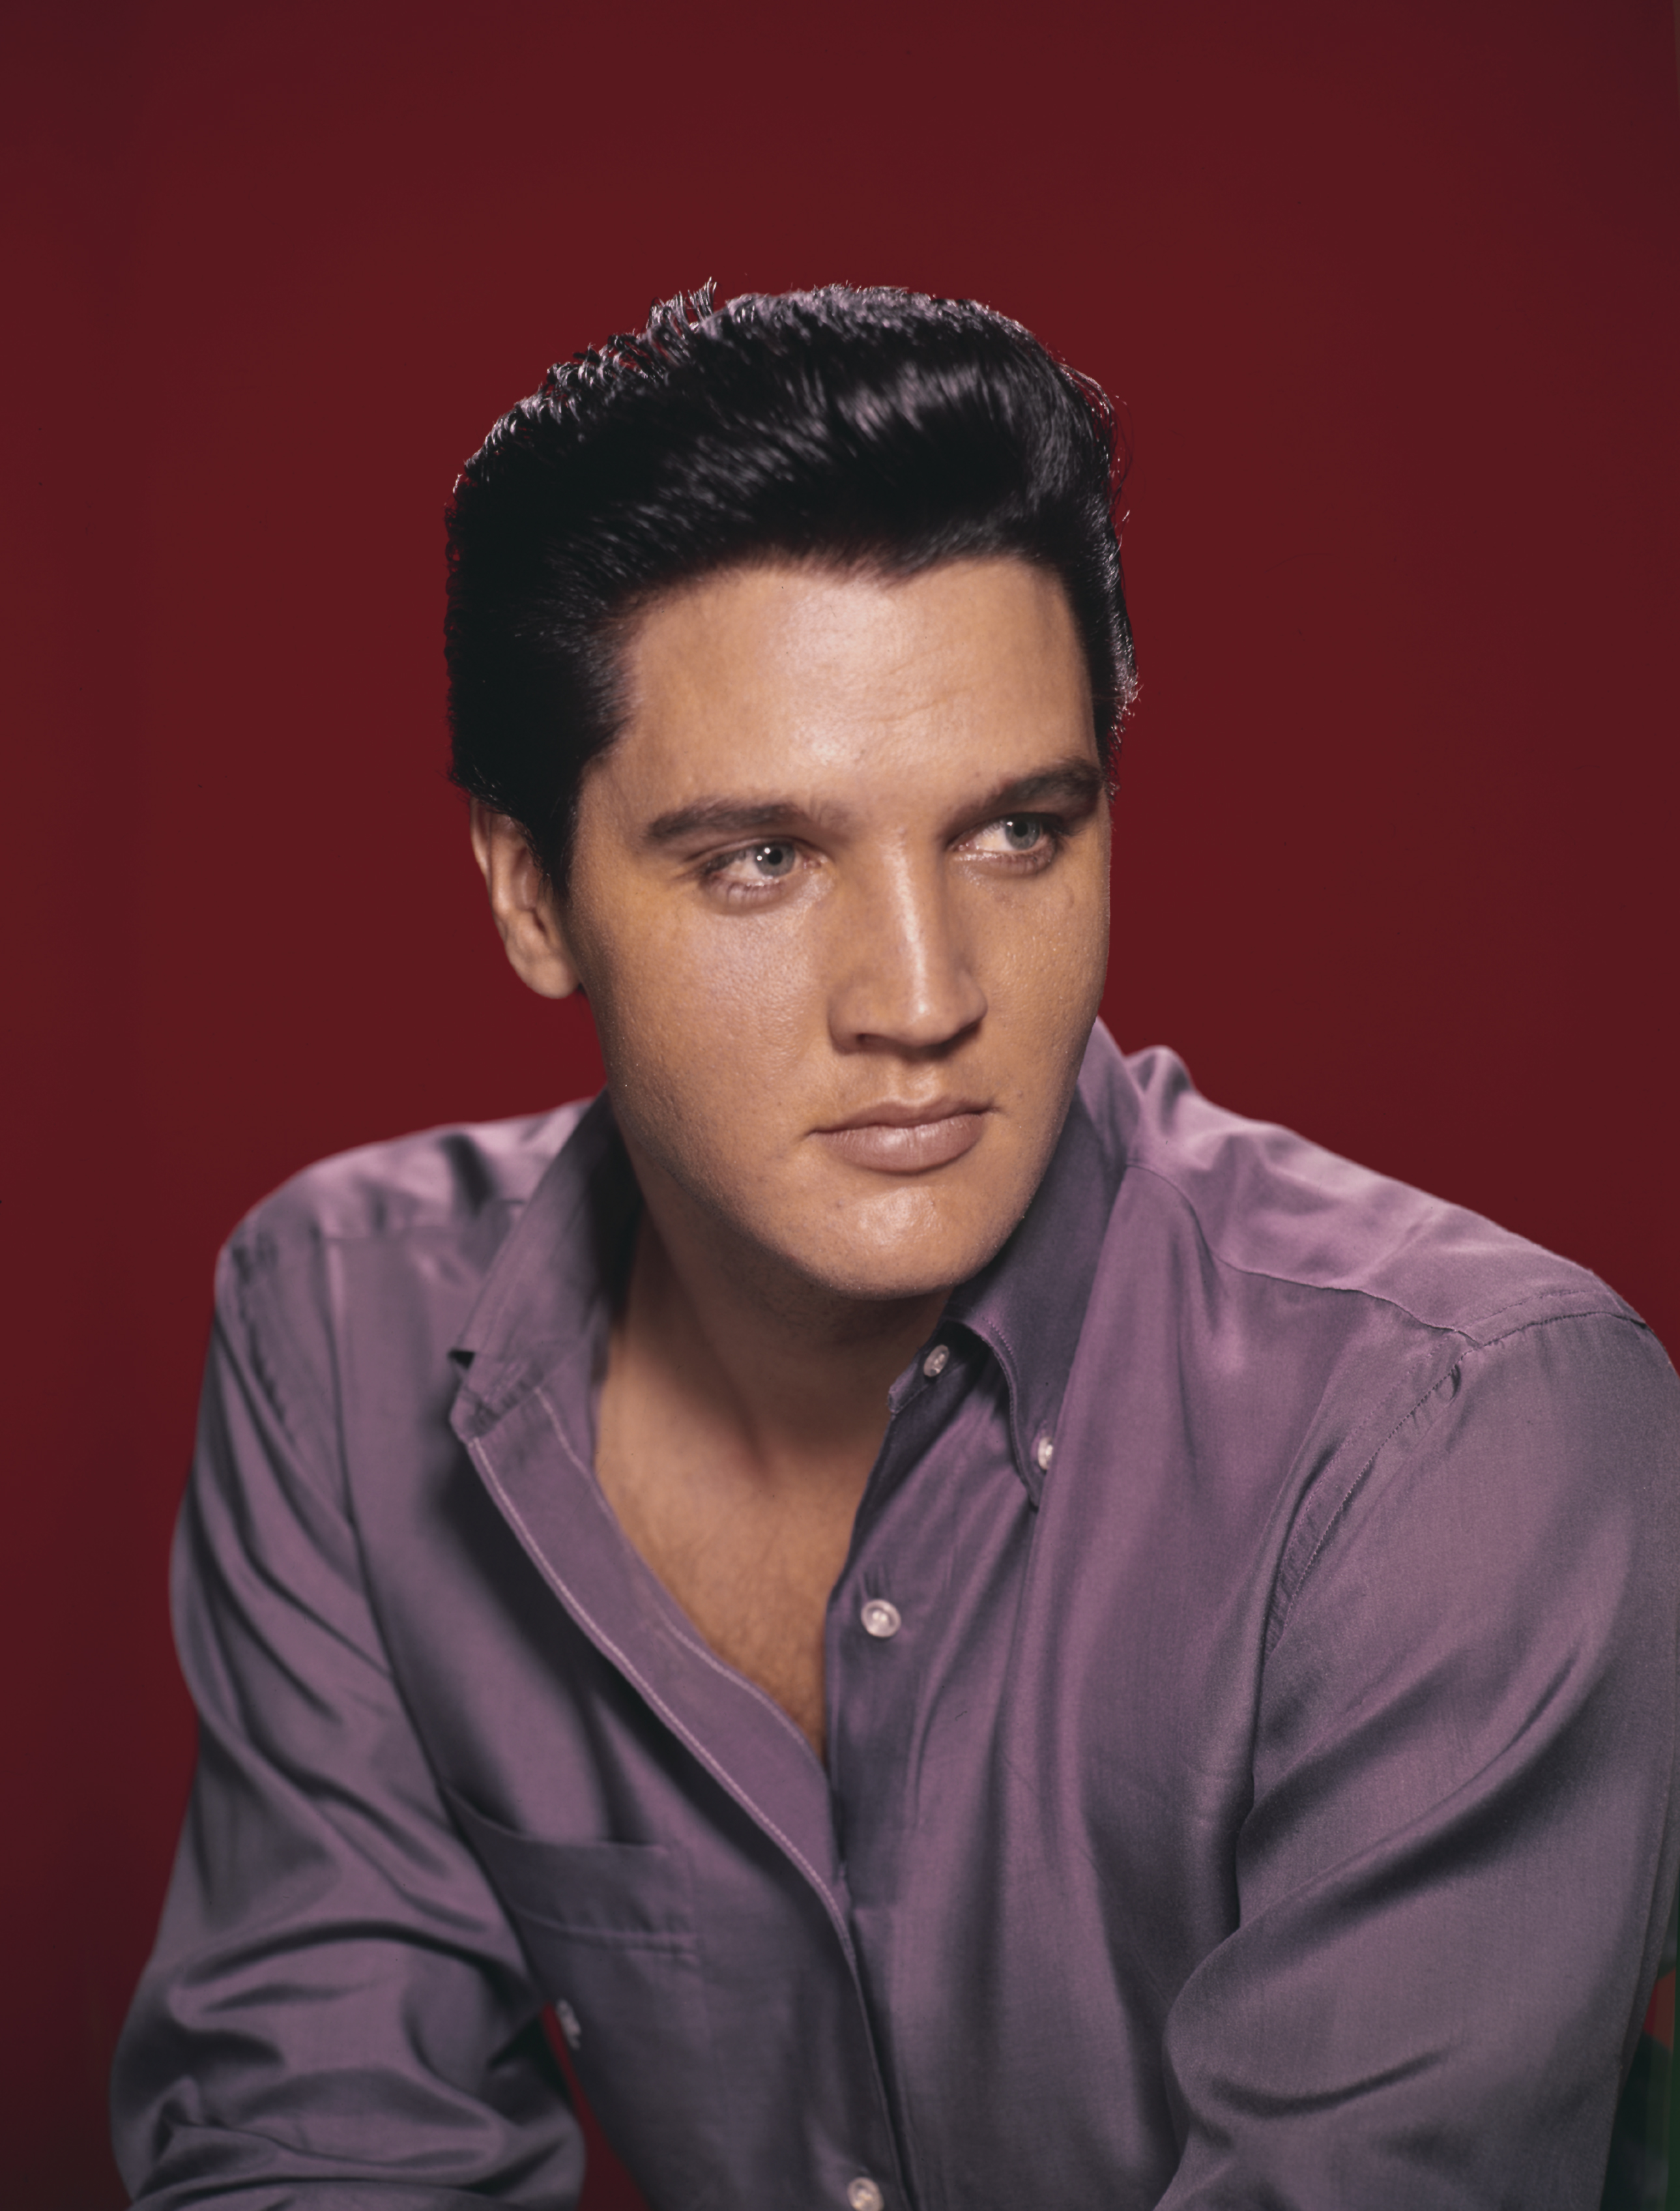 A portrait of American singer and actor Elvis Presley wearing a purple shirt circa 1956. | Source: Getty Images